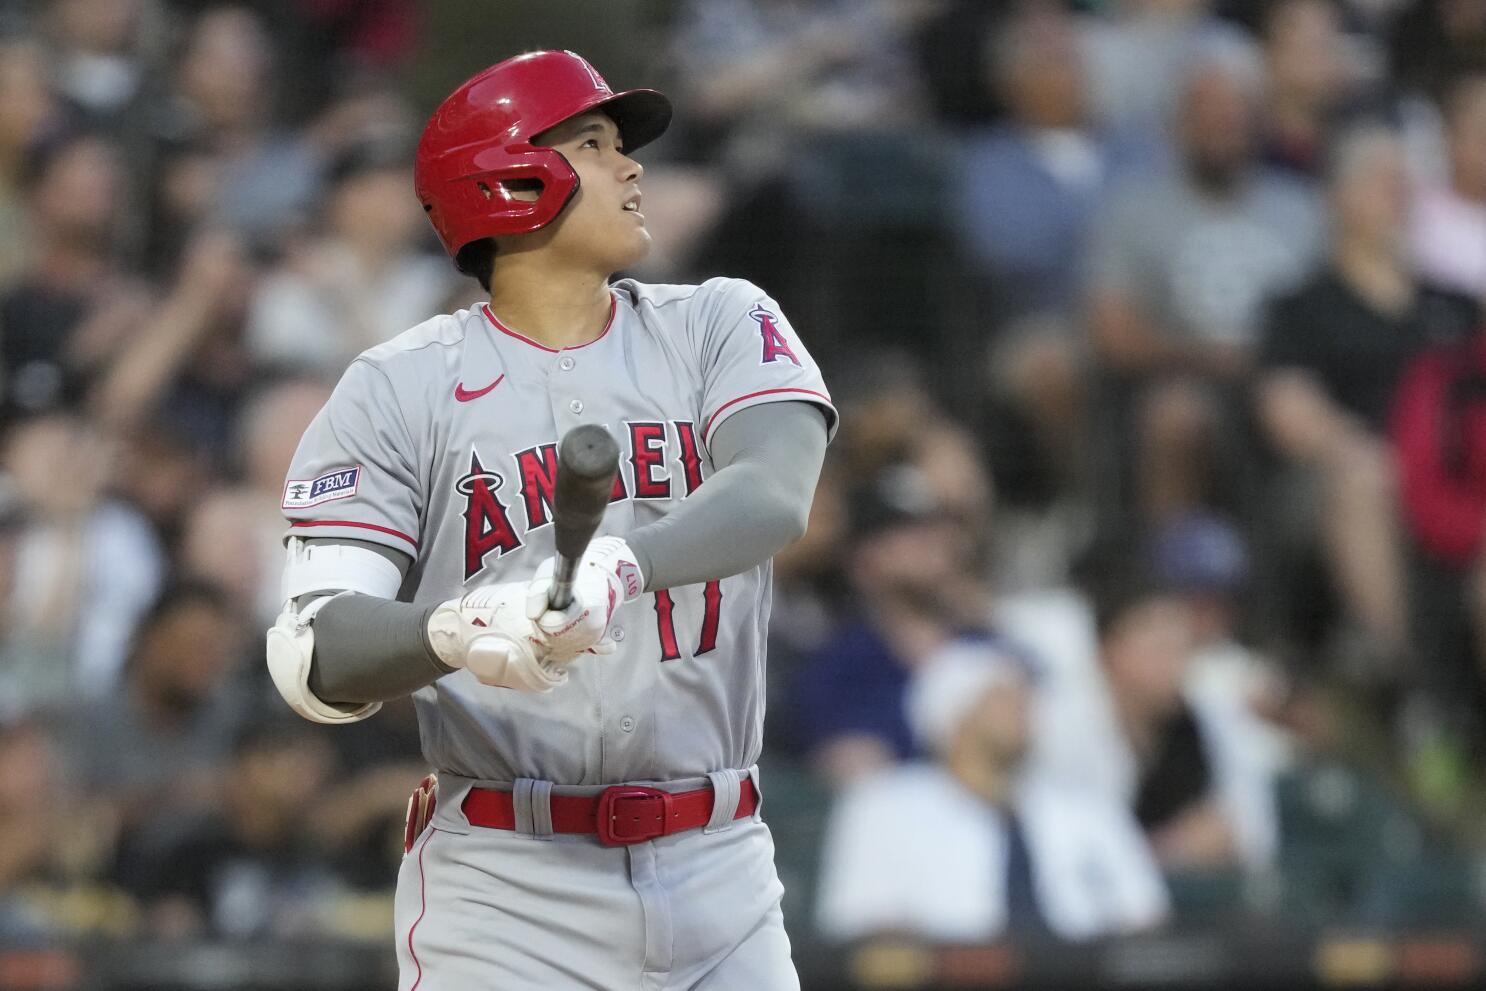 New Angels infielder Gio Urshela is ready for utility role